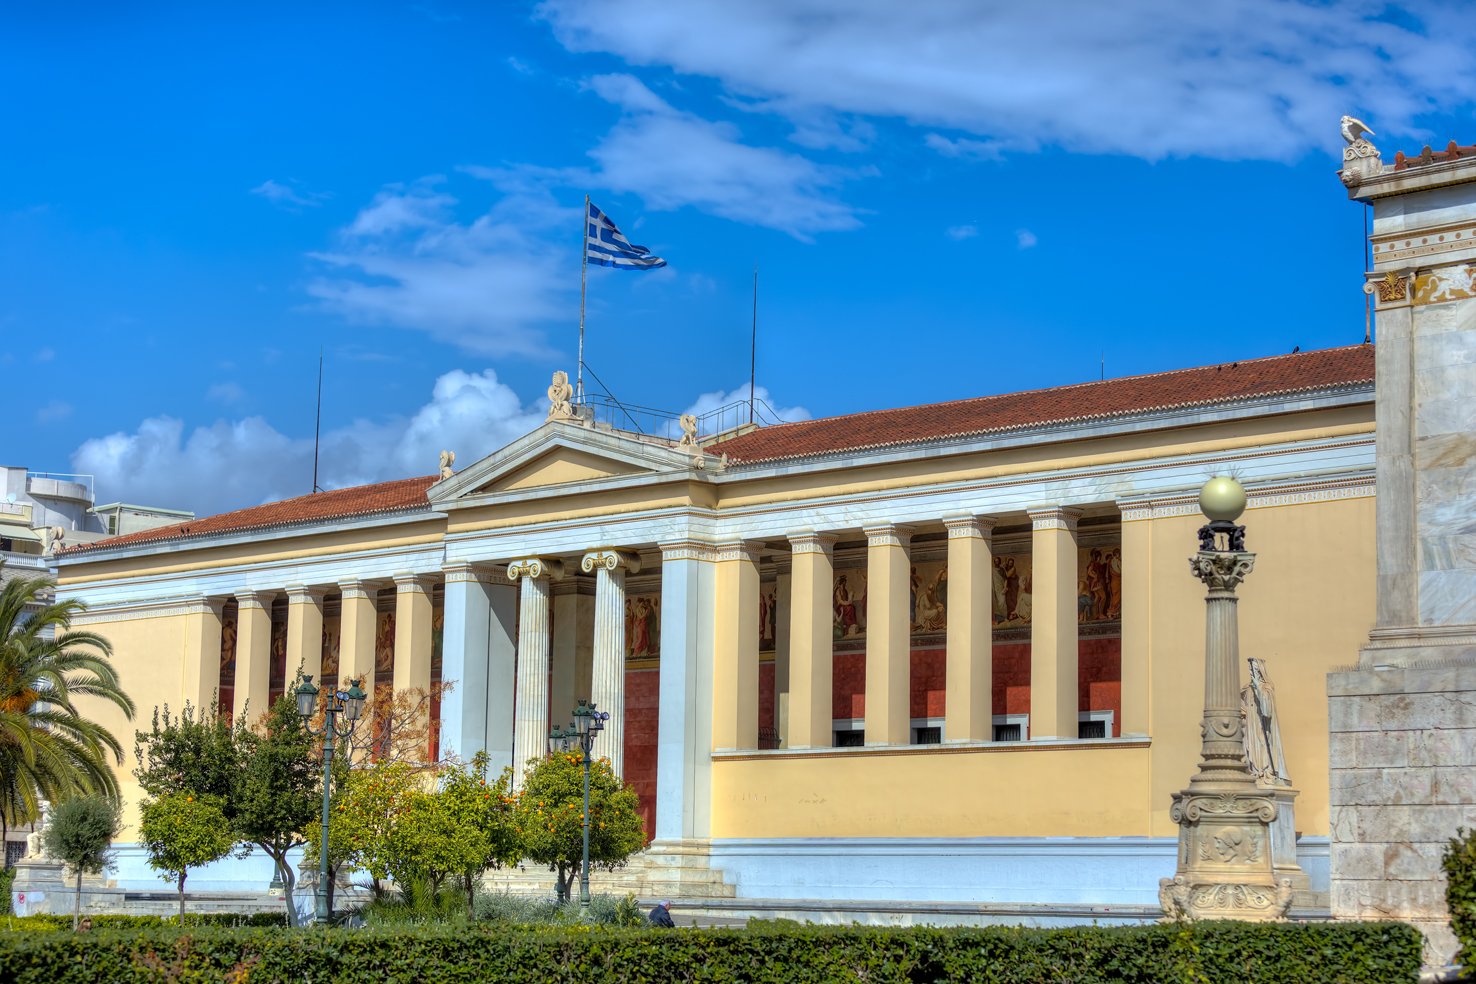 Cooperation between the University of Athens E-Learning and the Secretariat General for Greeks Abroad and Public Diplomacy